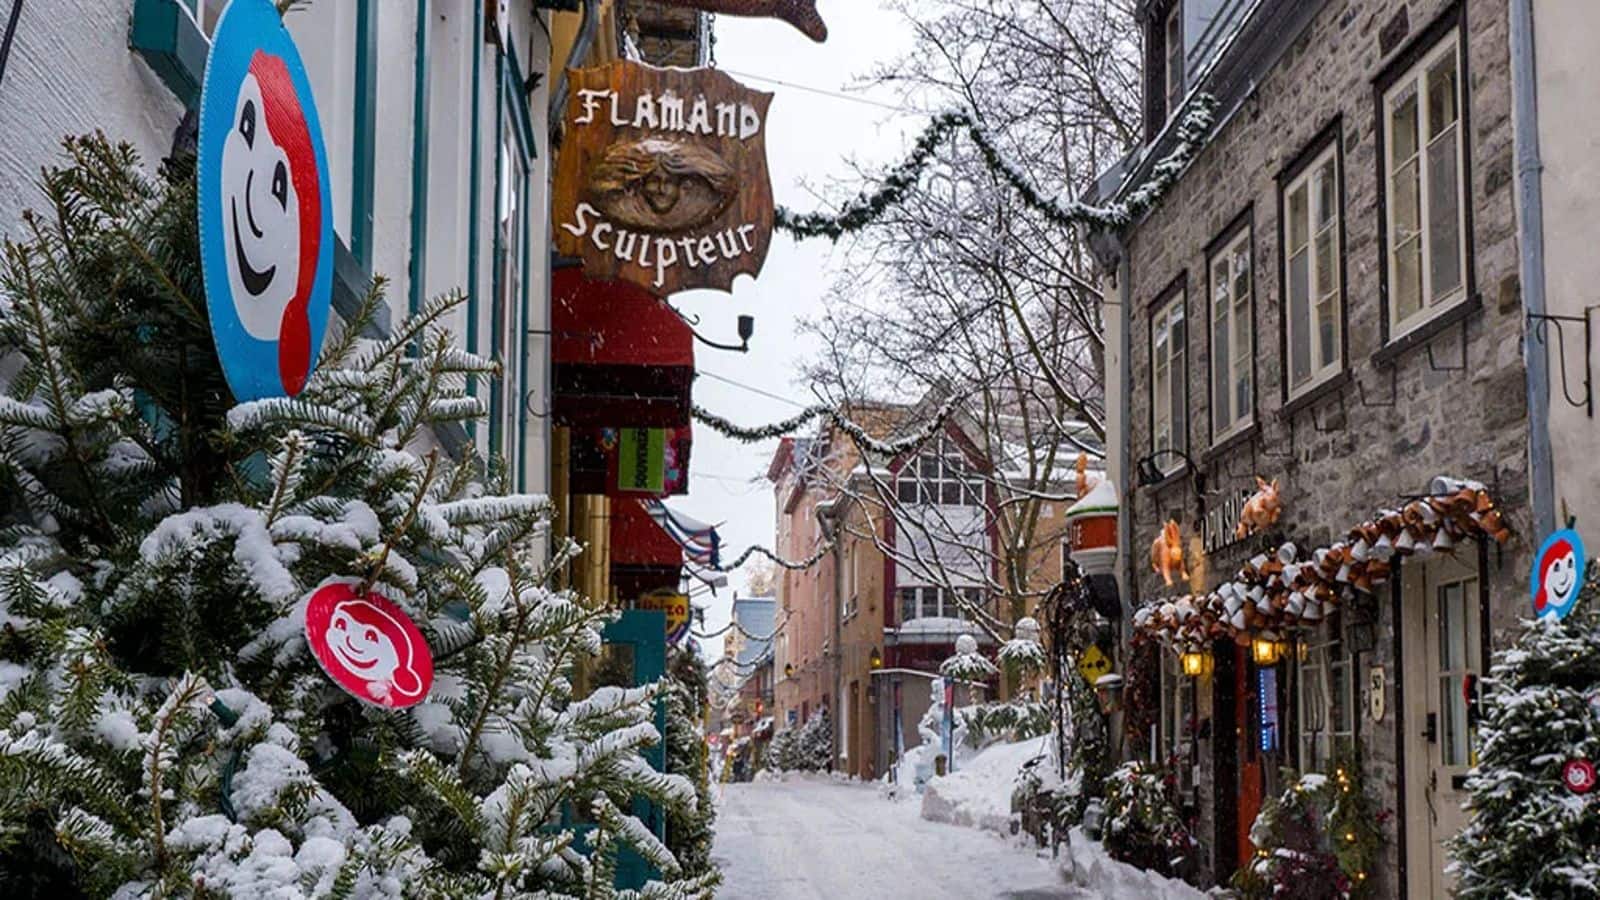 Quebec City's enchanting Winter Carnival is an unmissable attraction